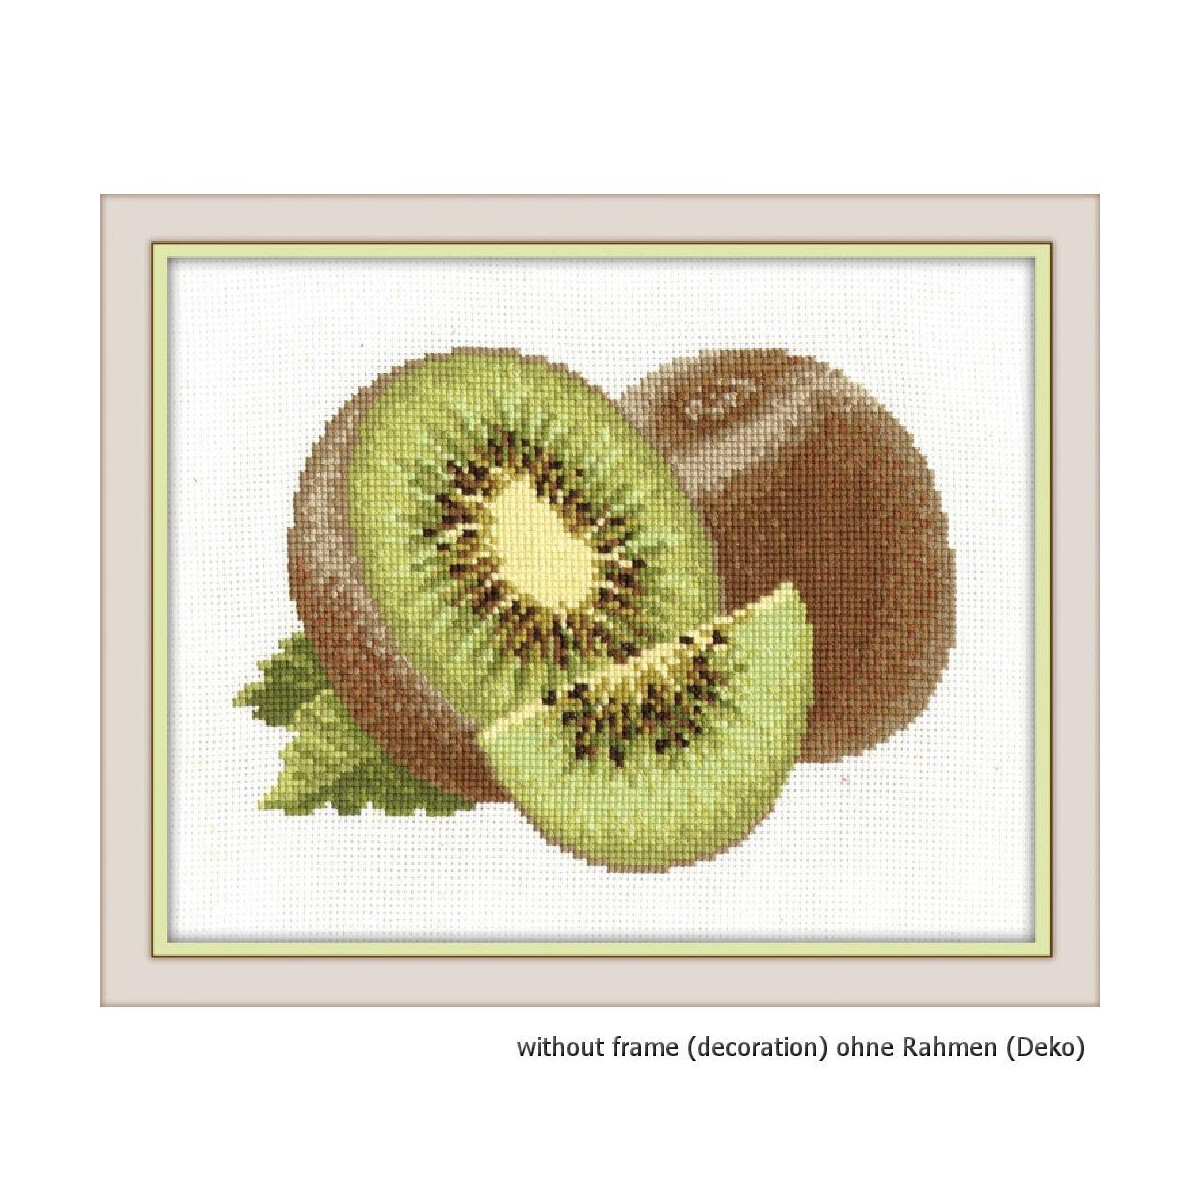 Oven counted cross stitch kit "Mixed fruits ",...